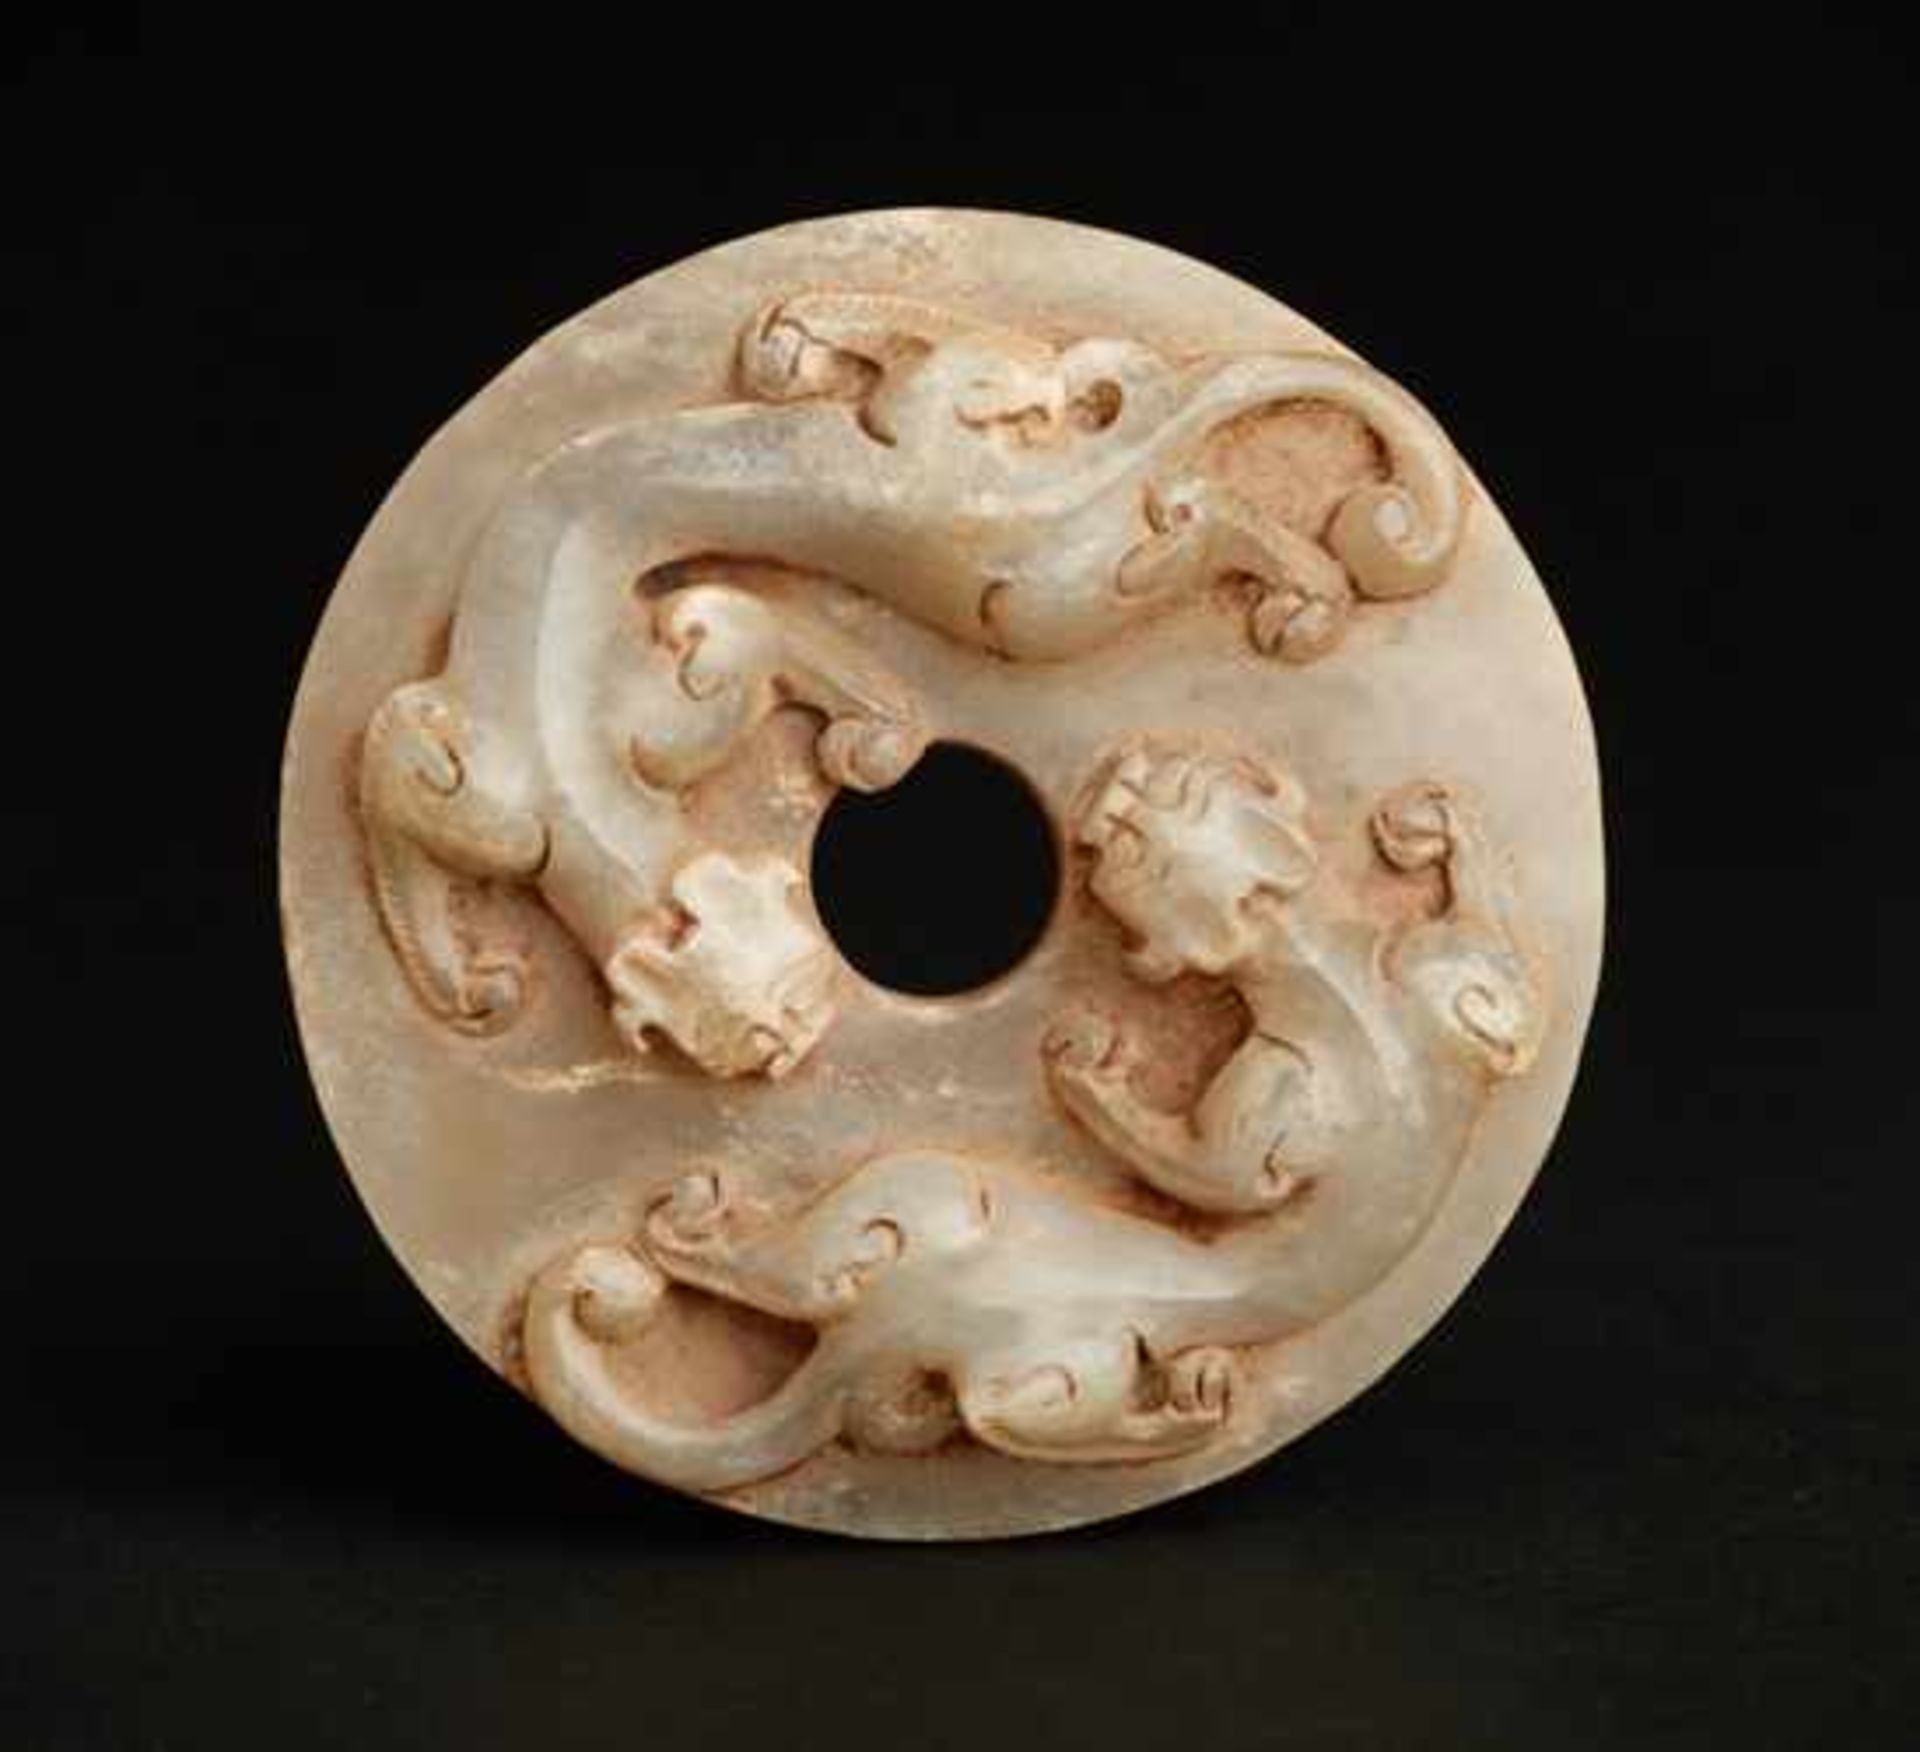 AN IMPRESSIVE WHITE JADE SWORD POMMEL WITH TWO DRAGONS CARVED IN RELIEF Jade, China. Western Han,